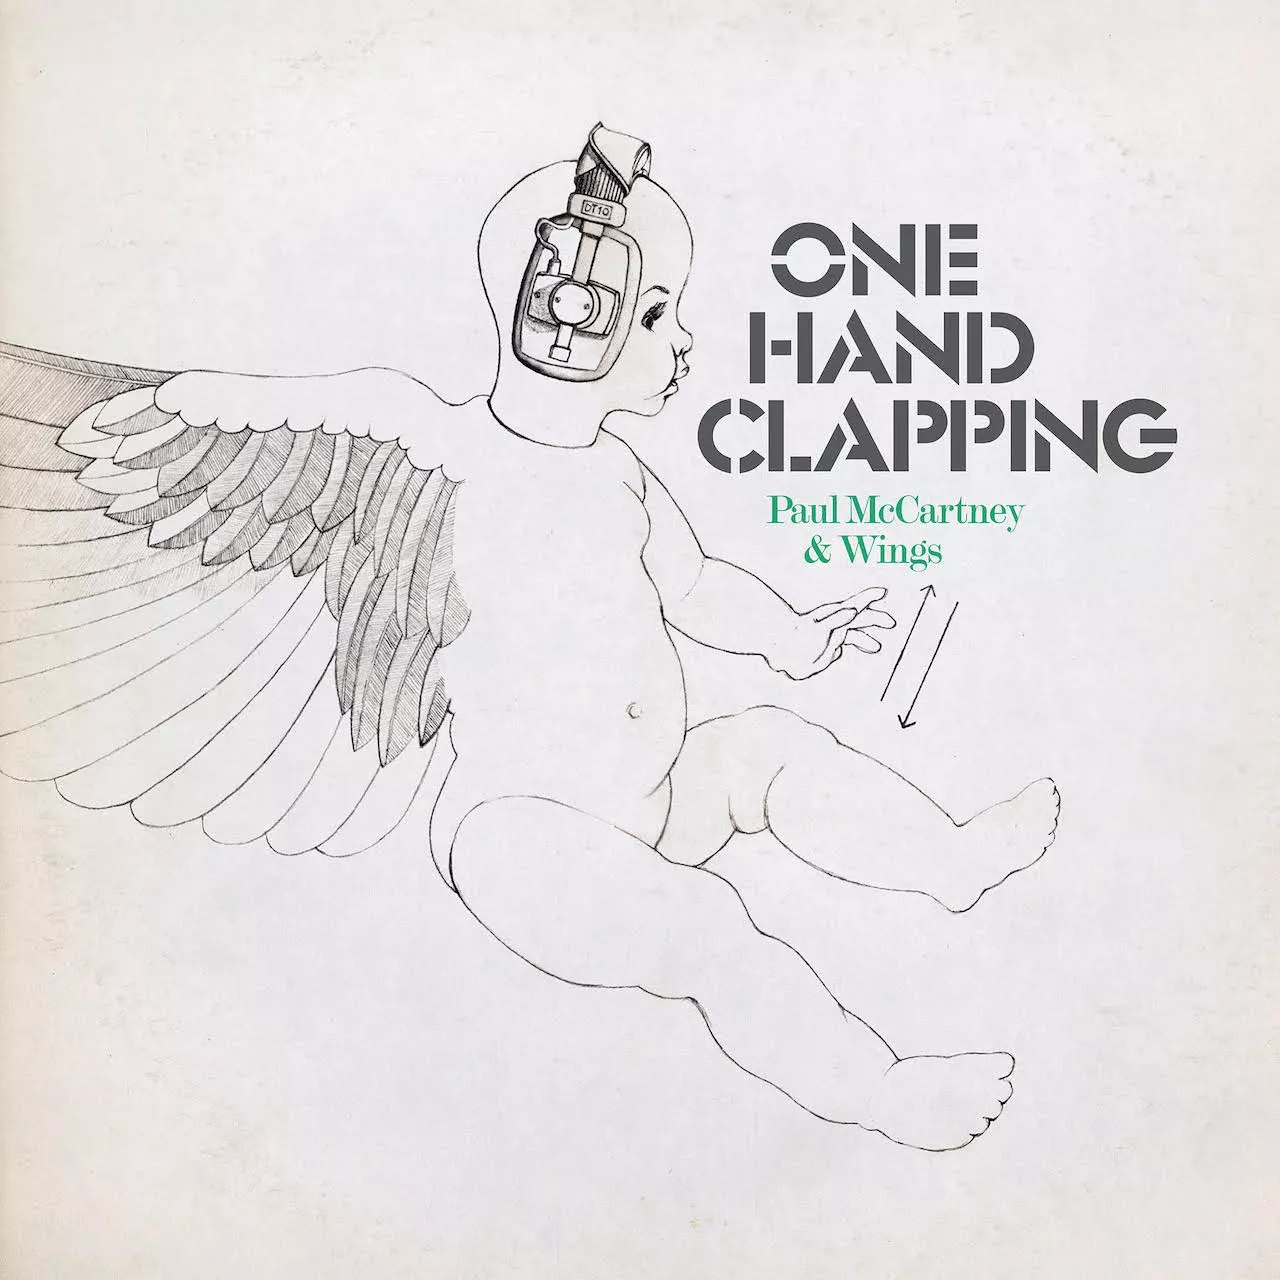 One Hand Clapping - Paul Mccartney & Wings